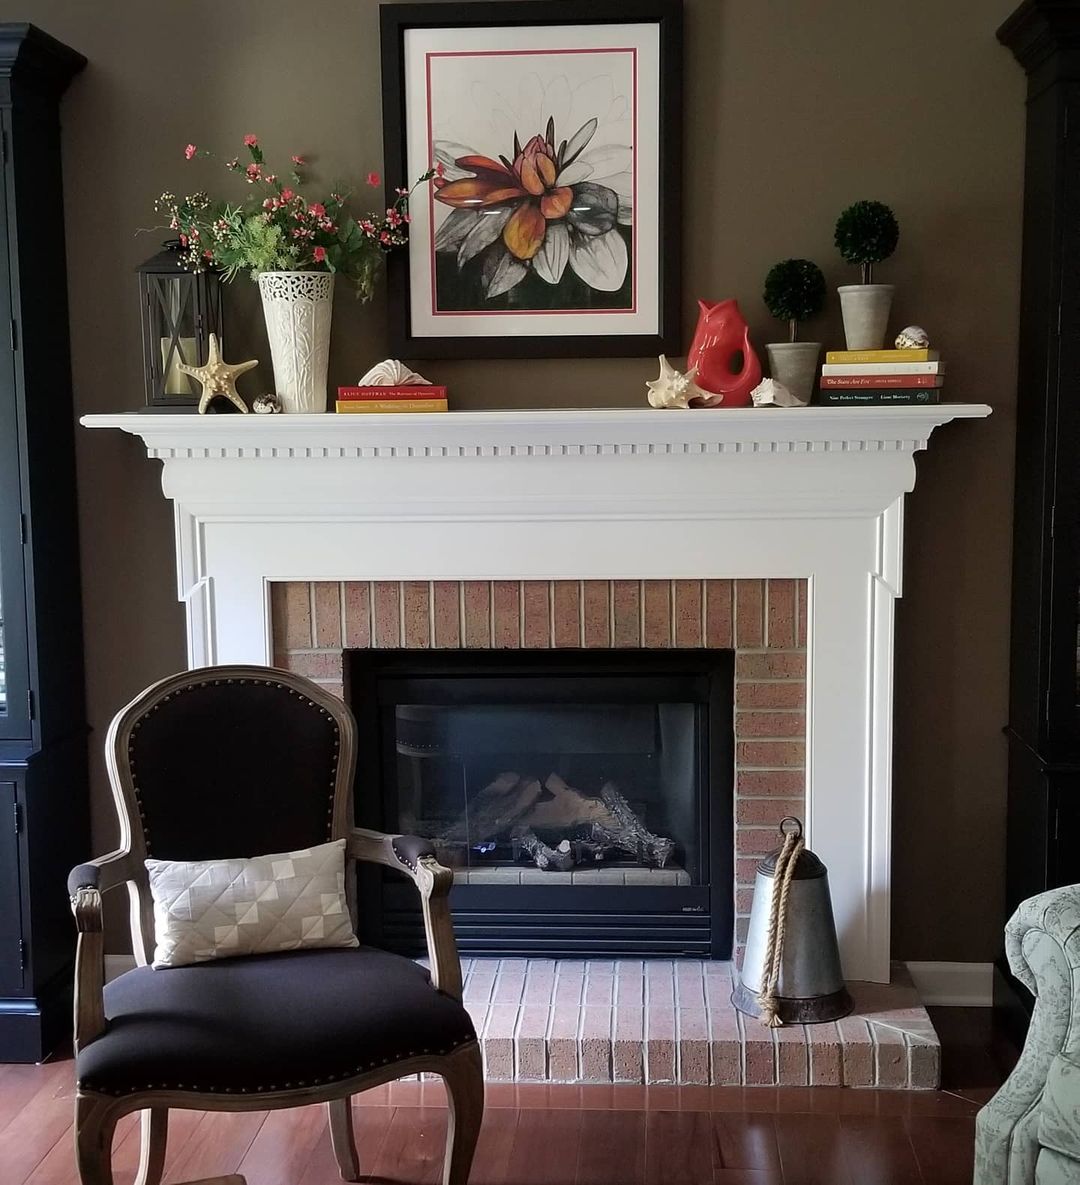 Warm and Earthy Tones for a Cozy Summer Mantel